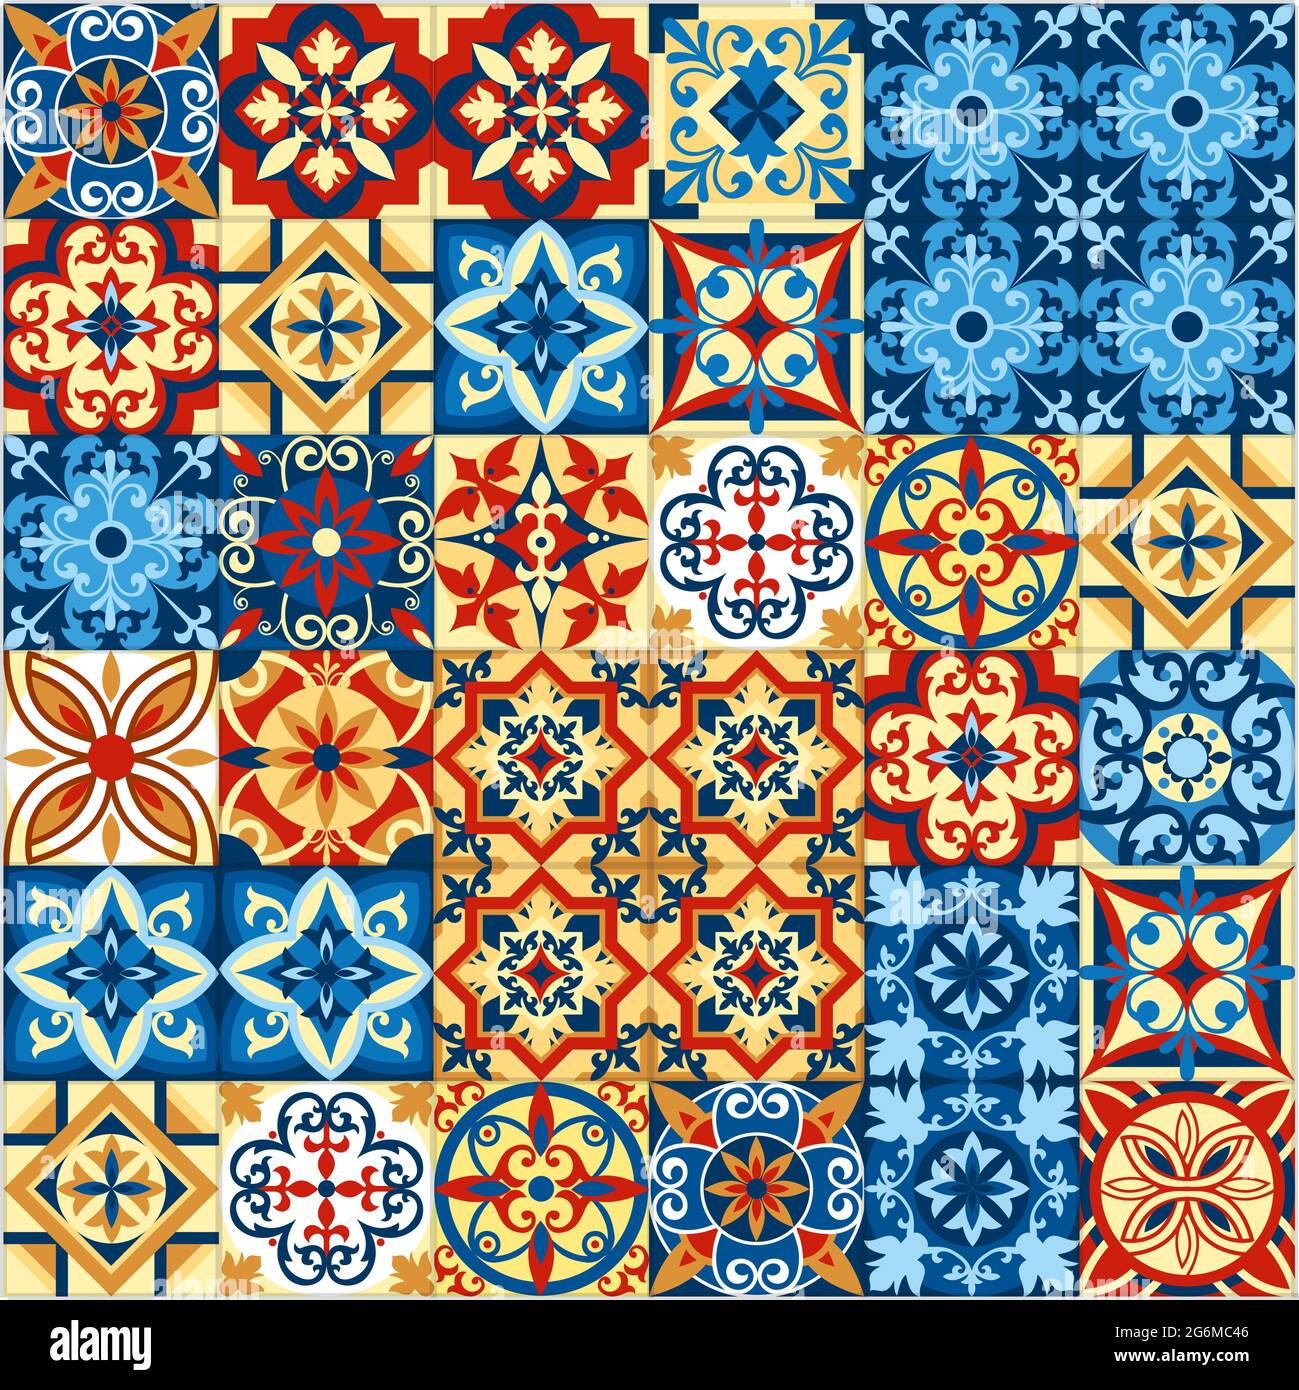 Vector illustration of decorative tile mosaic pattern design in Moroccan style. Stock Vector